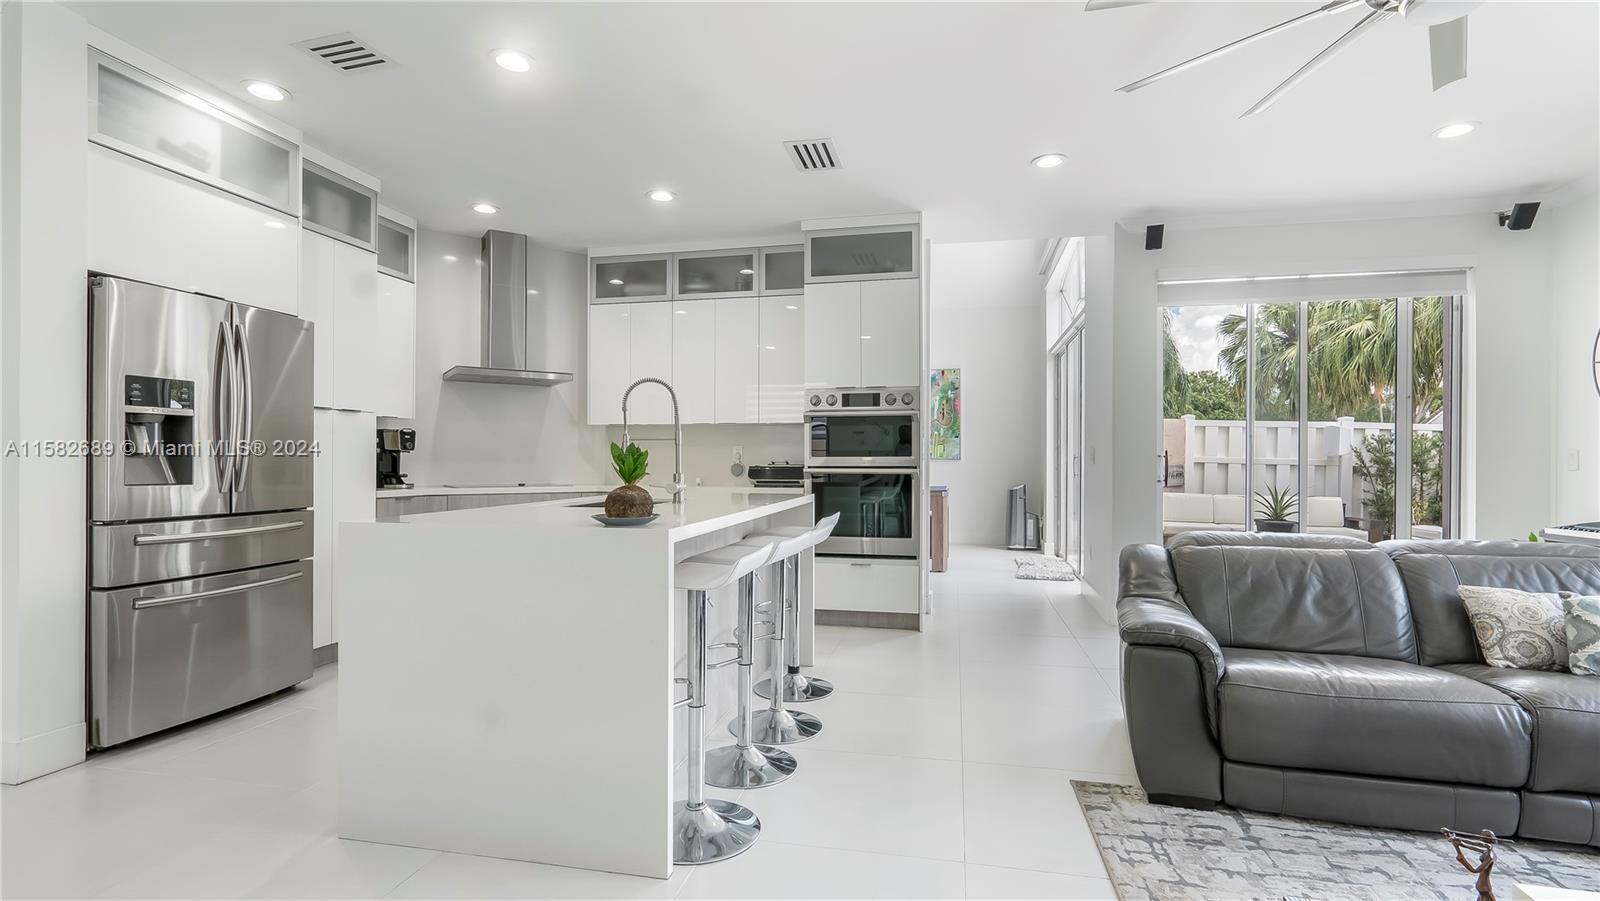 a kitchen with stainless steel appliances kitchen island granite countertop a refrigerator and a couch